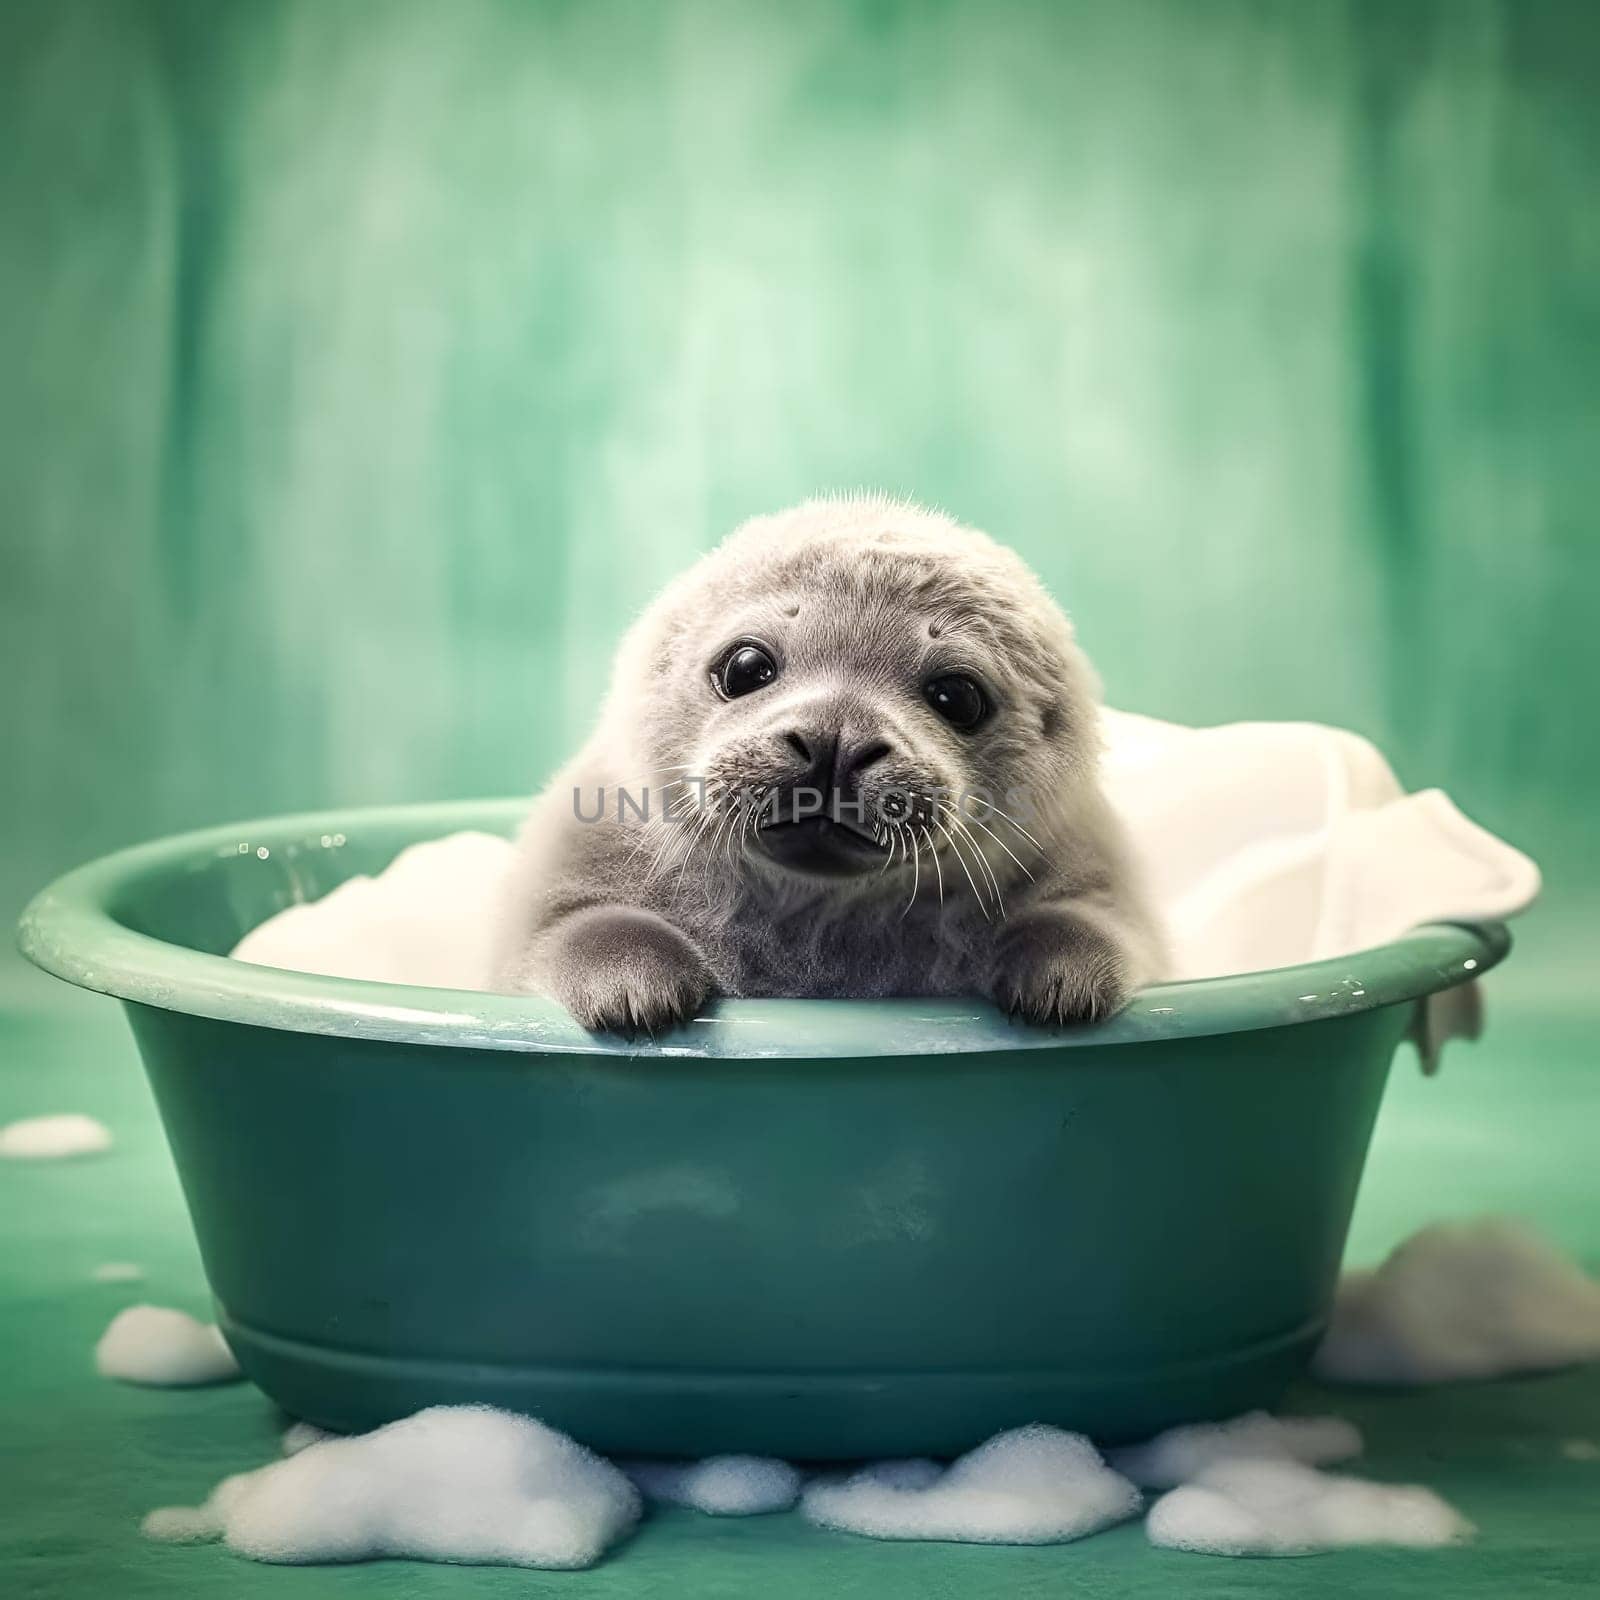 An adorable fur seal pup enjoys a bath, surrounded by fluffy foam, against a colorful background. Perfect for design projects and animal-themed content